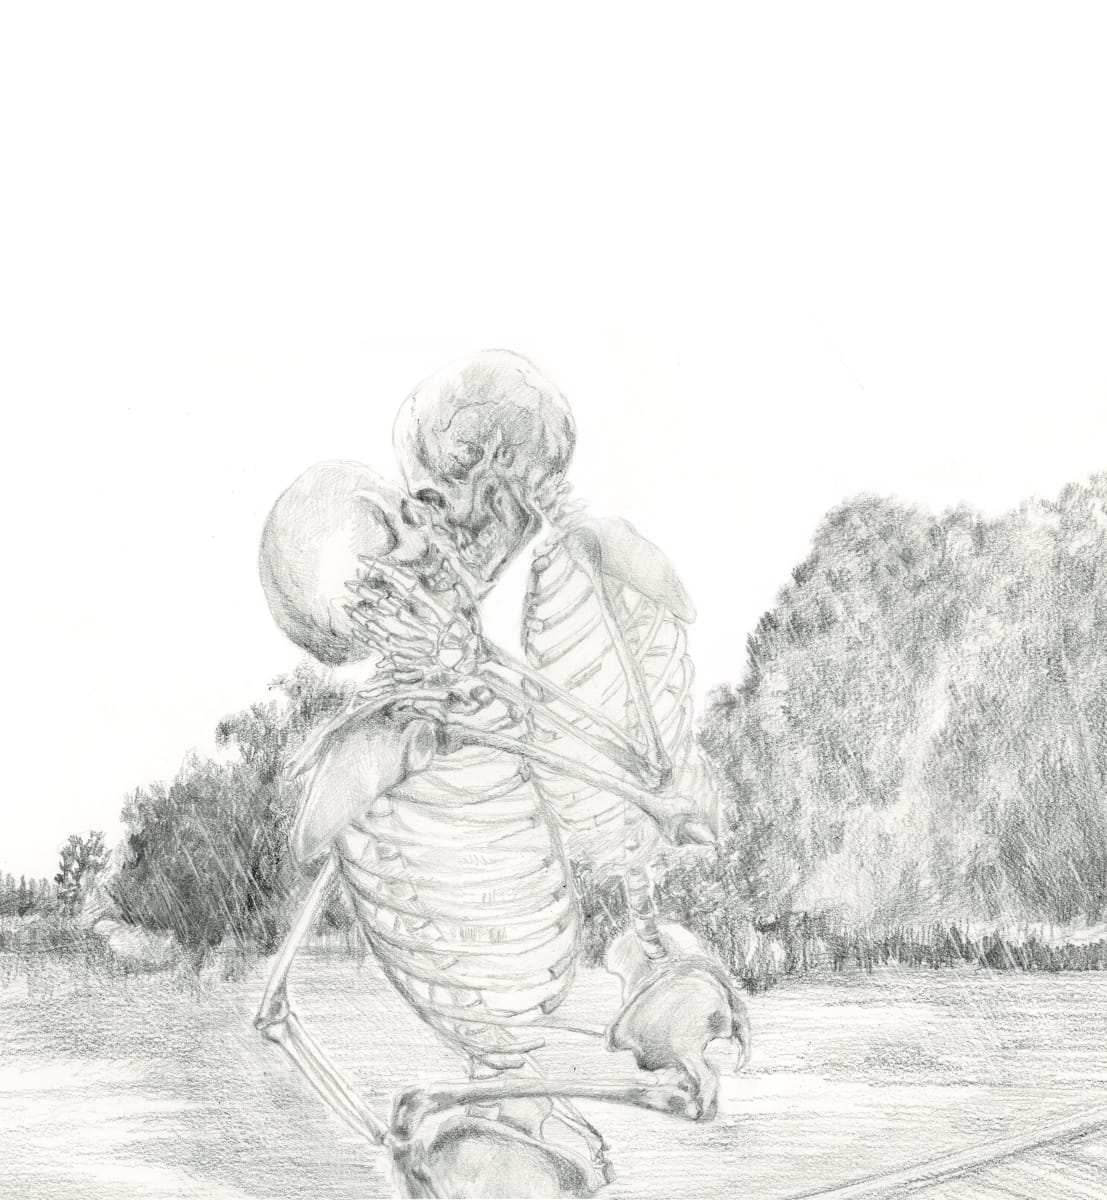 THE NOTEBOOK by Sarah Jaynes  Image: THE NOTEBOOK
Sarah Jaynes
2021
Graphite
16x20 in